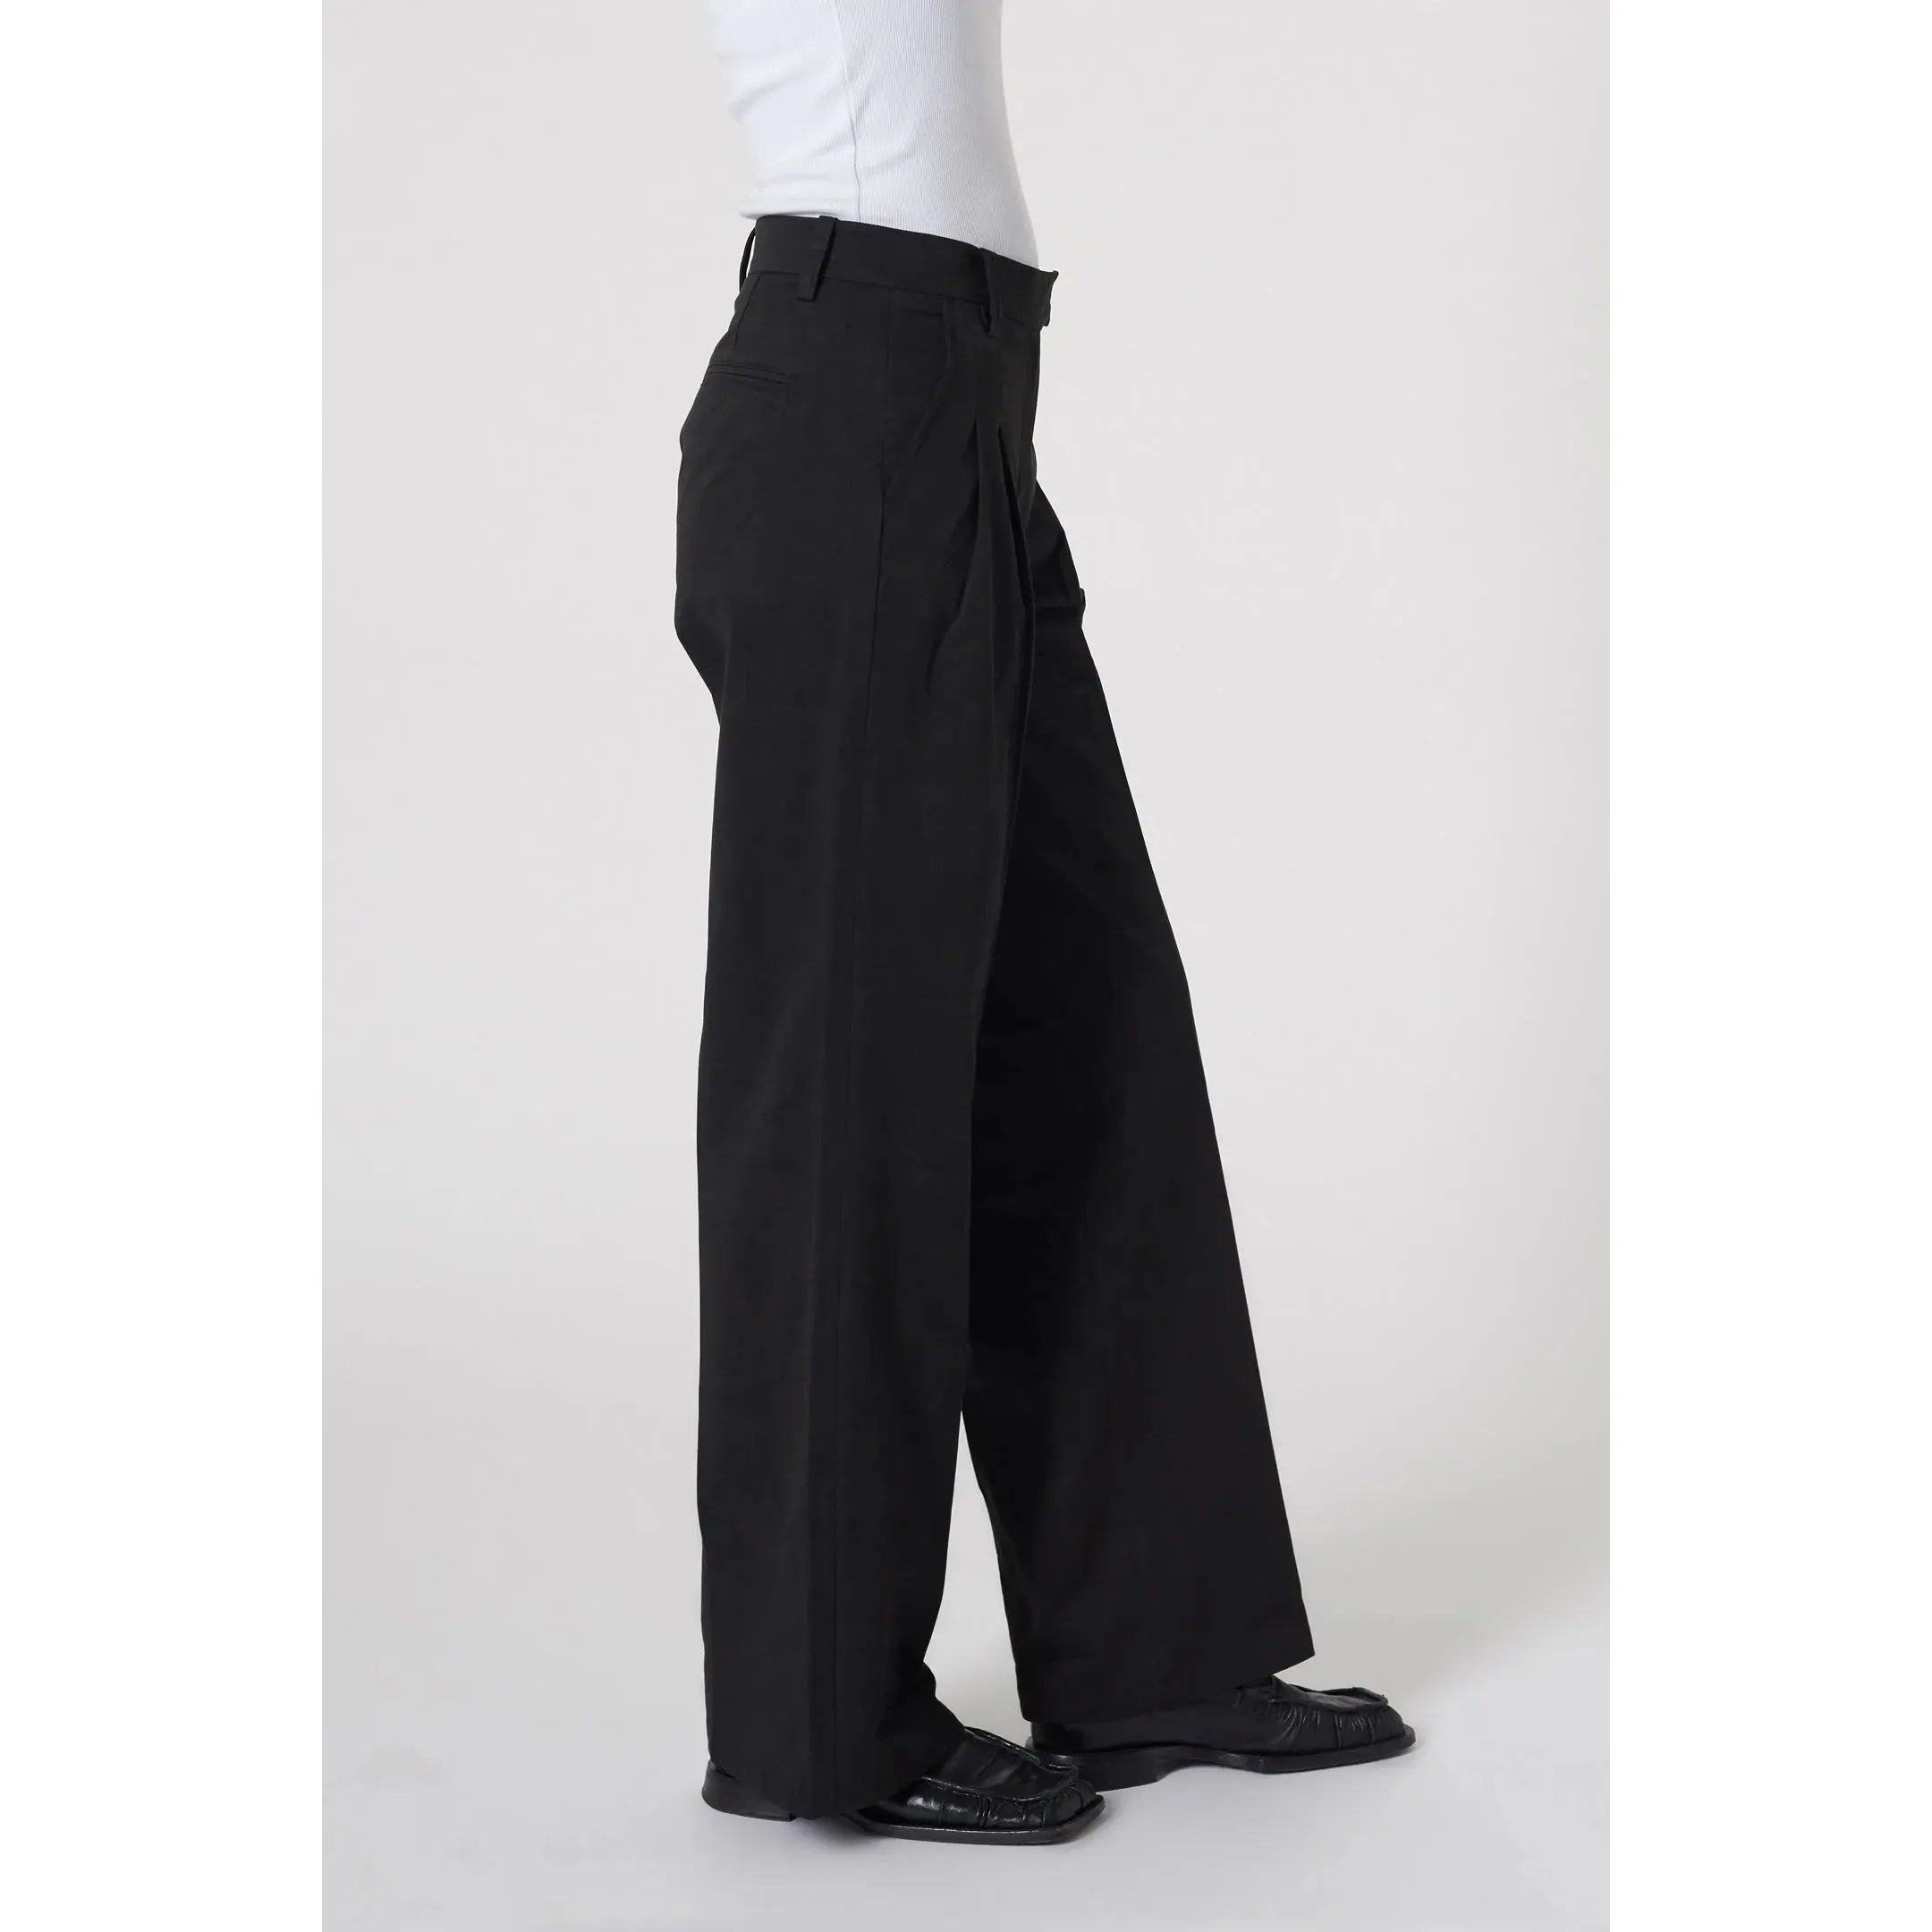 Coco Relaxed Pant - Black